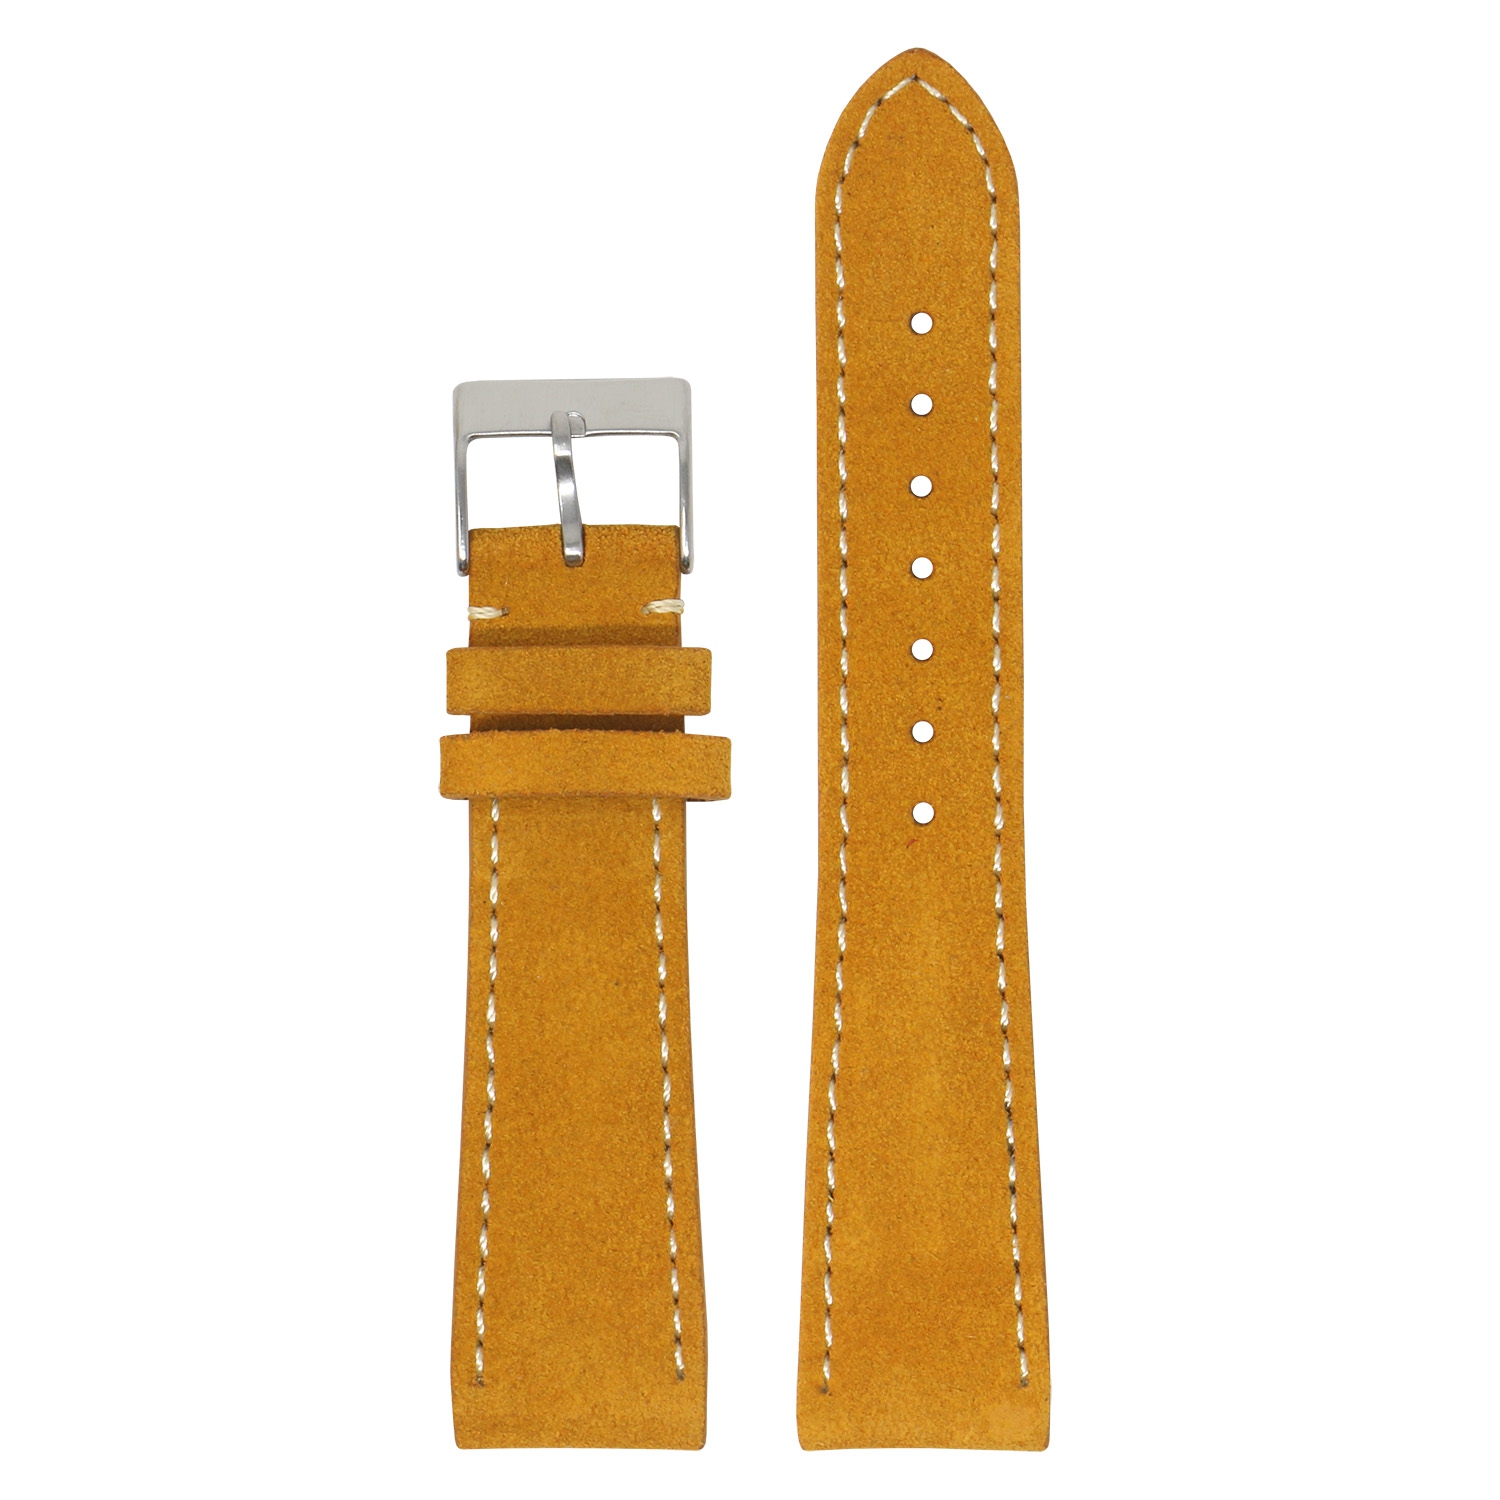 StrapsCo Classic Suede (Short, Standard, Long) Watch Band Strap for Samsung Galaxy Watch 3 - Long Length - 20mm - For 41mm Galaxy Watch3 - Orange